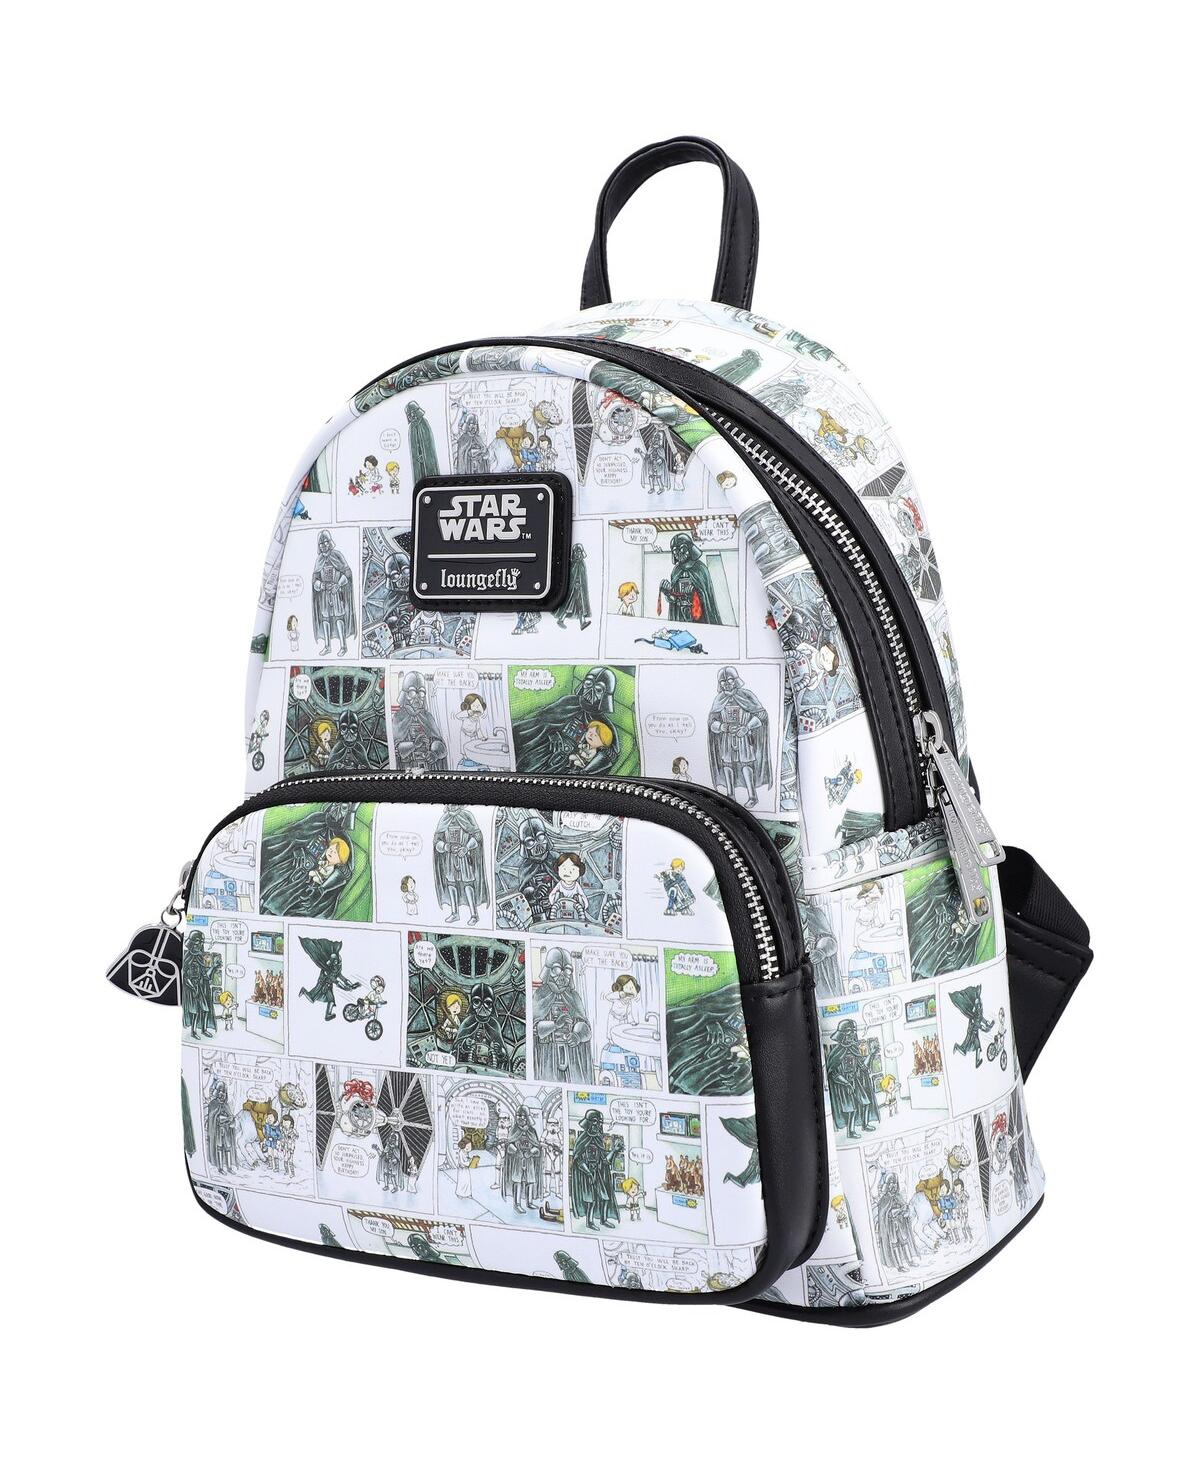 Men's and Women's Loungefly Star Wars Darth Vader's I Am Your Father's Day Mini Backpack - White